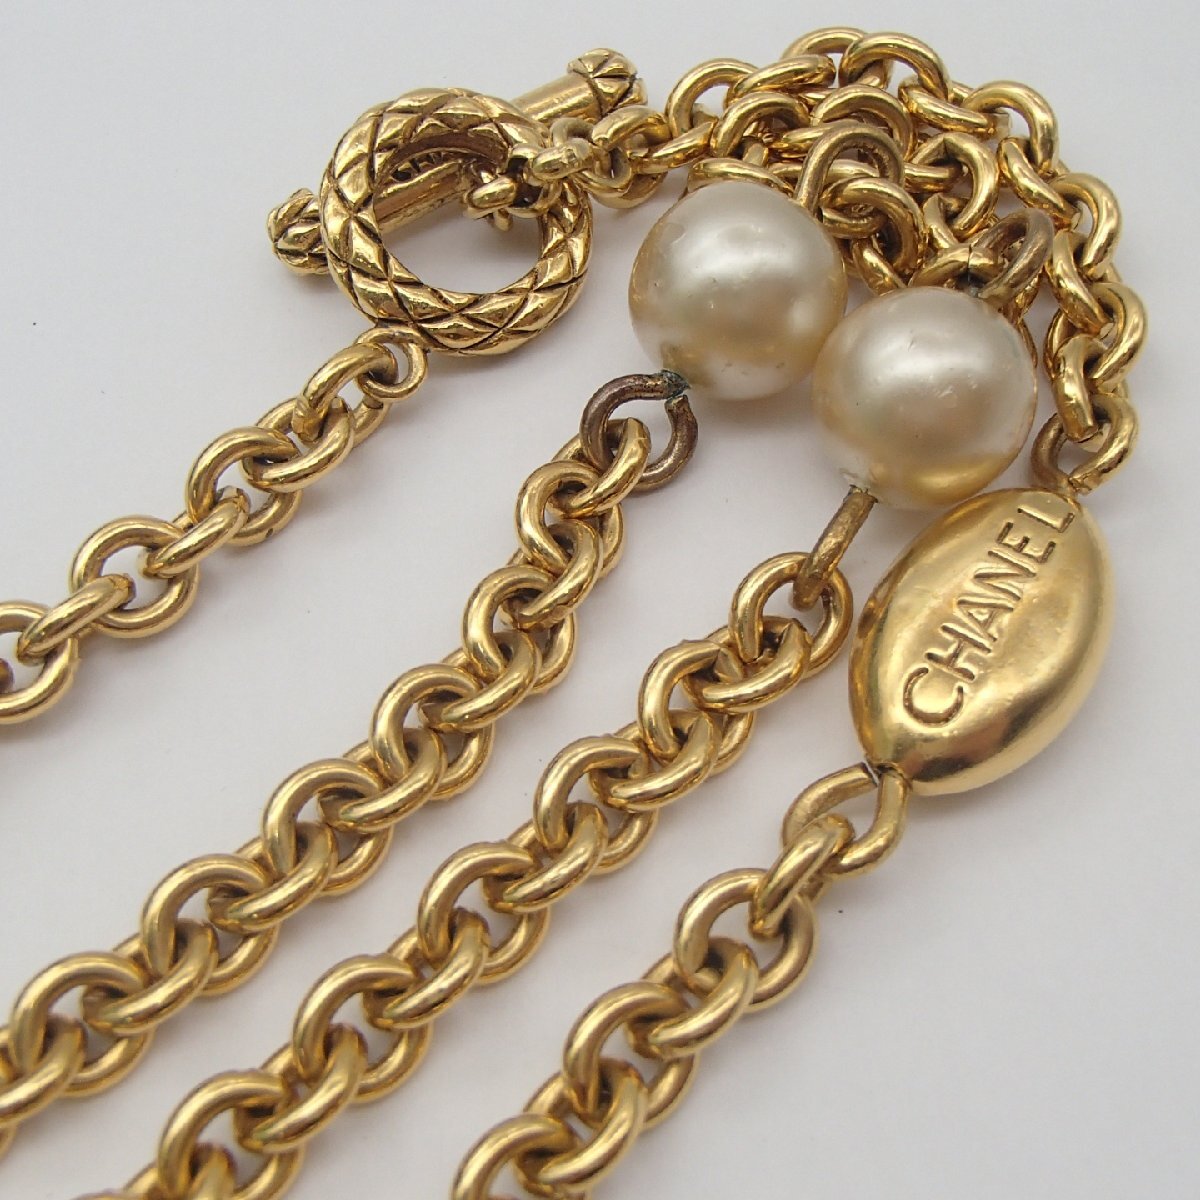 *CHANEL Chanel necklace / Vintage fake pearl here here Mark accessory box *KI